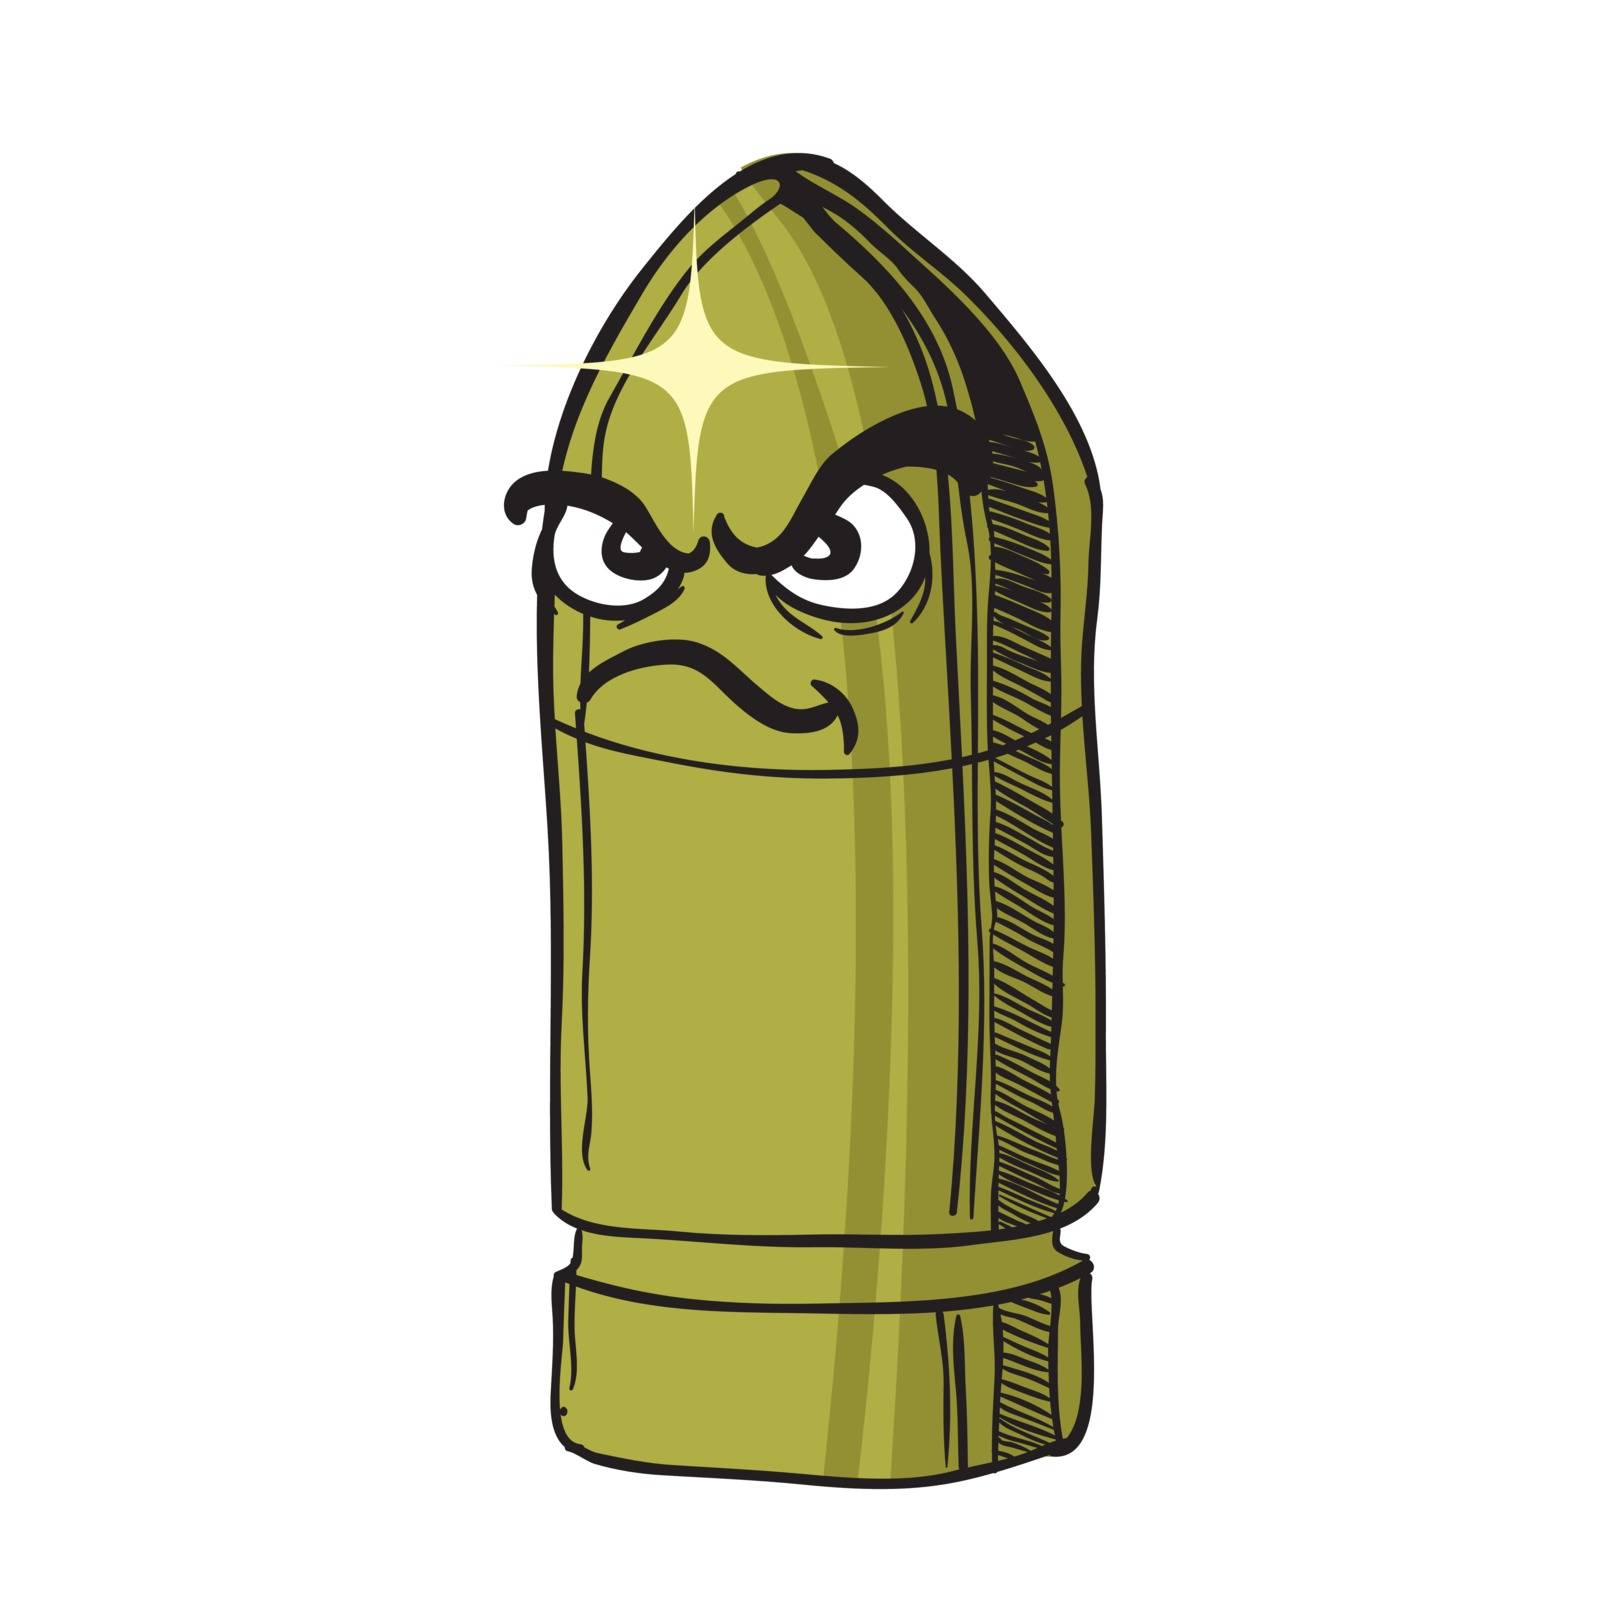 angry bullet cartoon illustration isolated on white